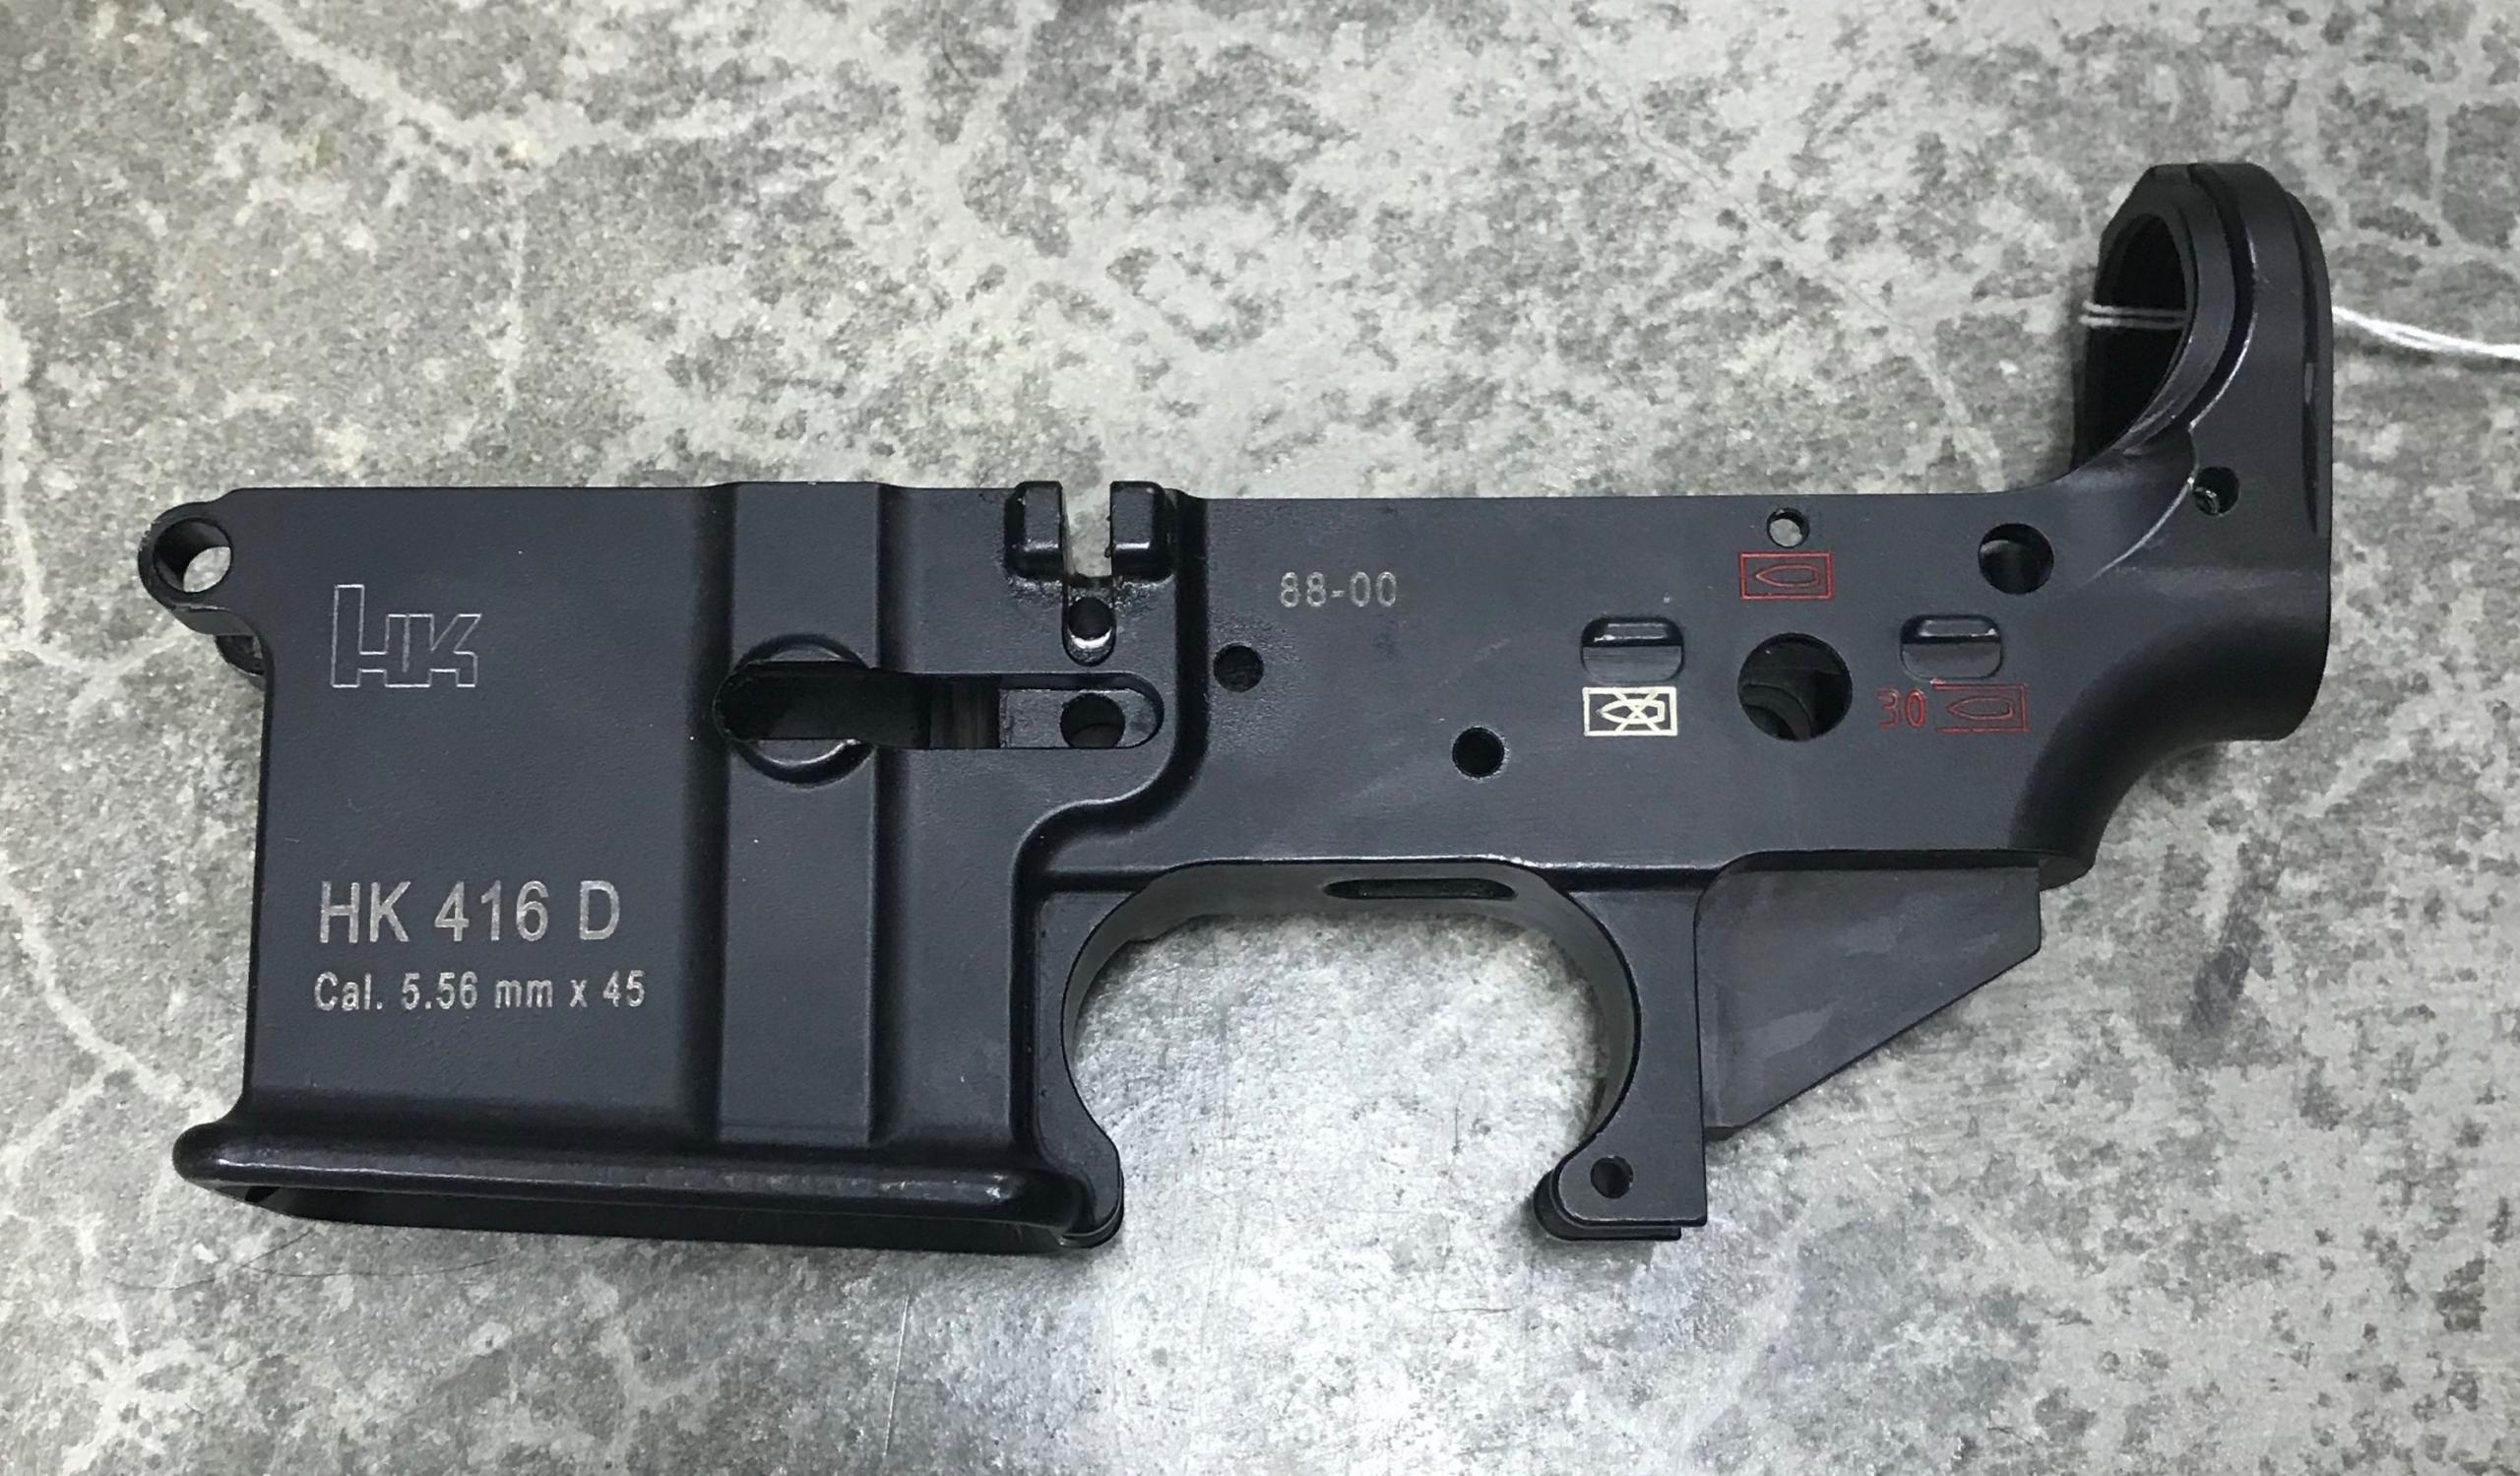 View the topic WTS: HK 416 D Stripped Receiver $300 shipped. 